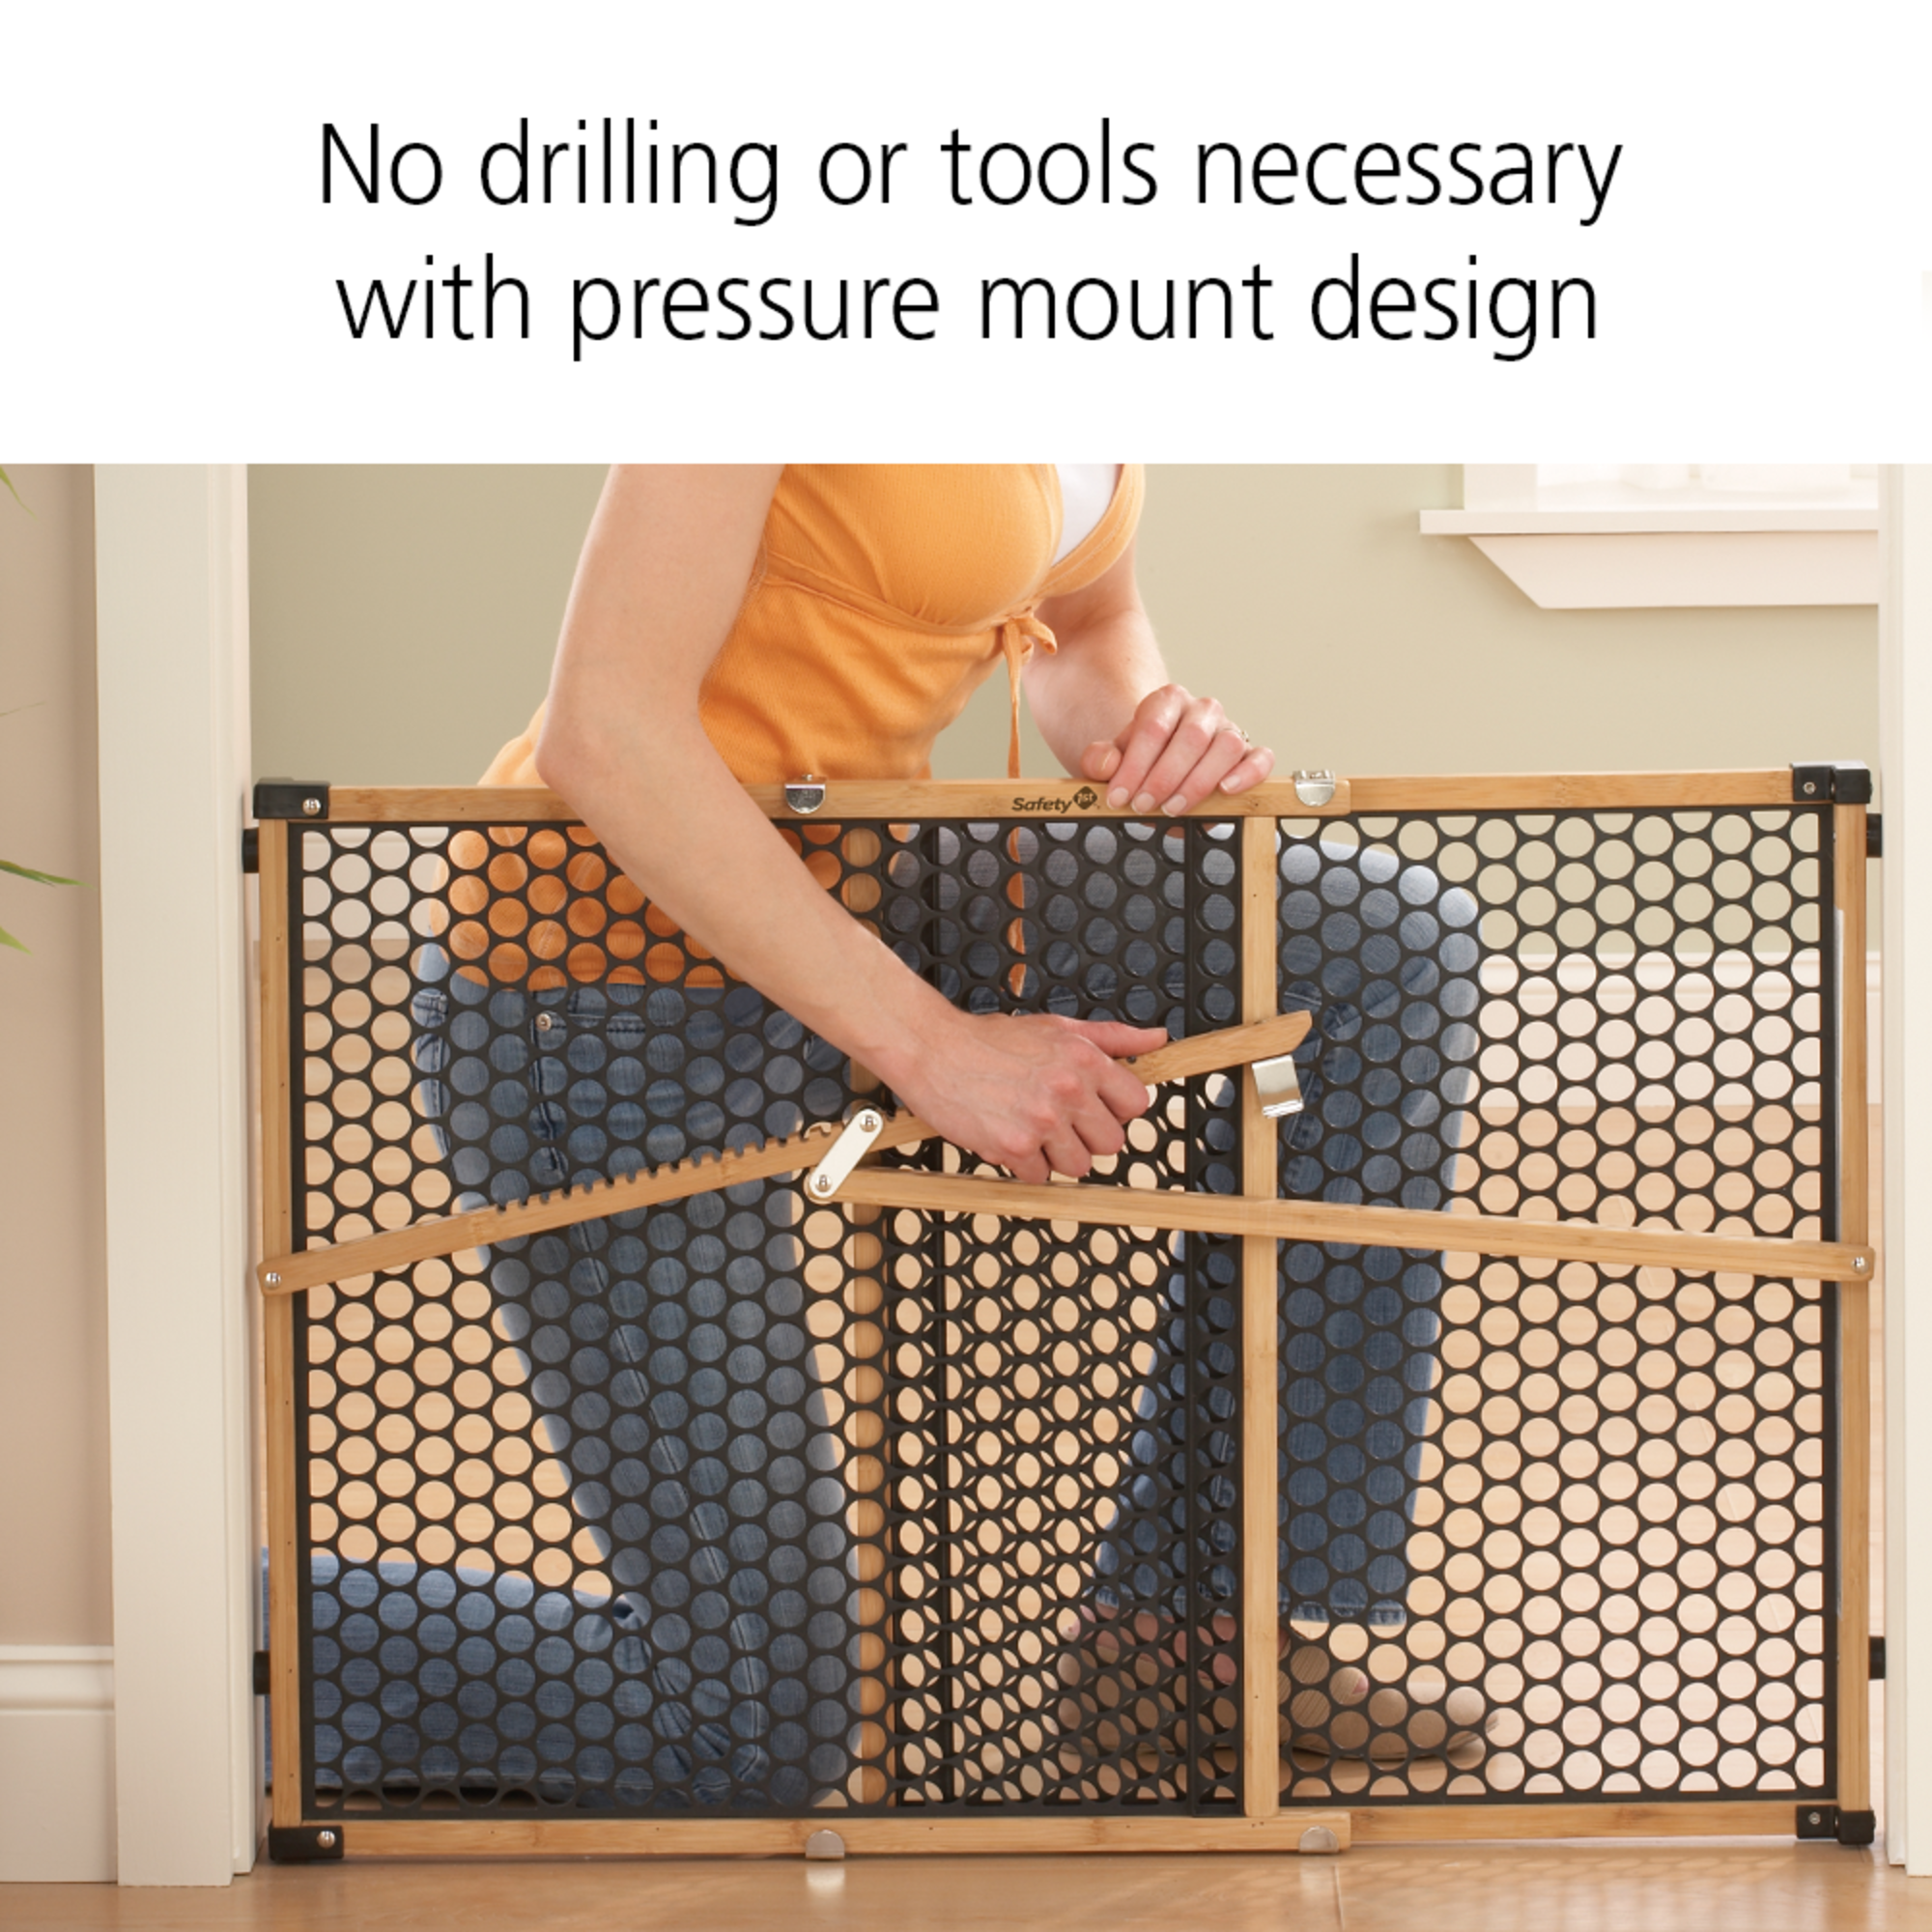 Baby gate with no drilling or tools necessary with pressure mount design.